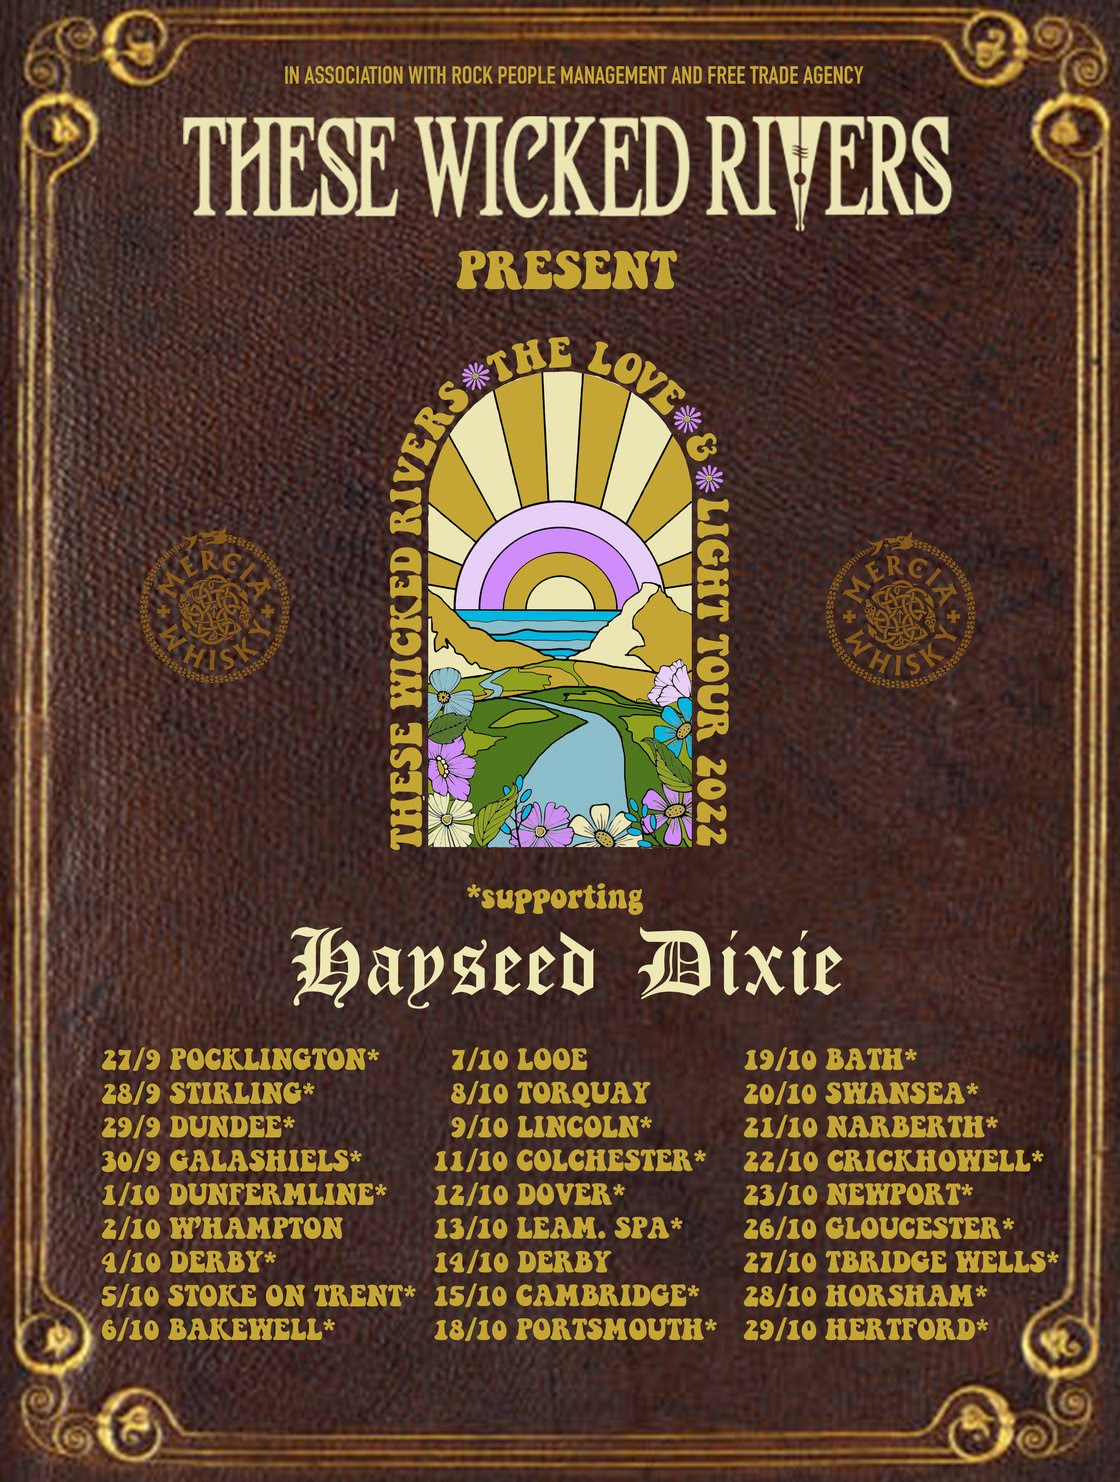 These Wicked Rivers Hayseed Dixie Tour 2022-1